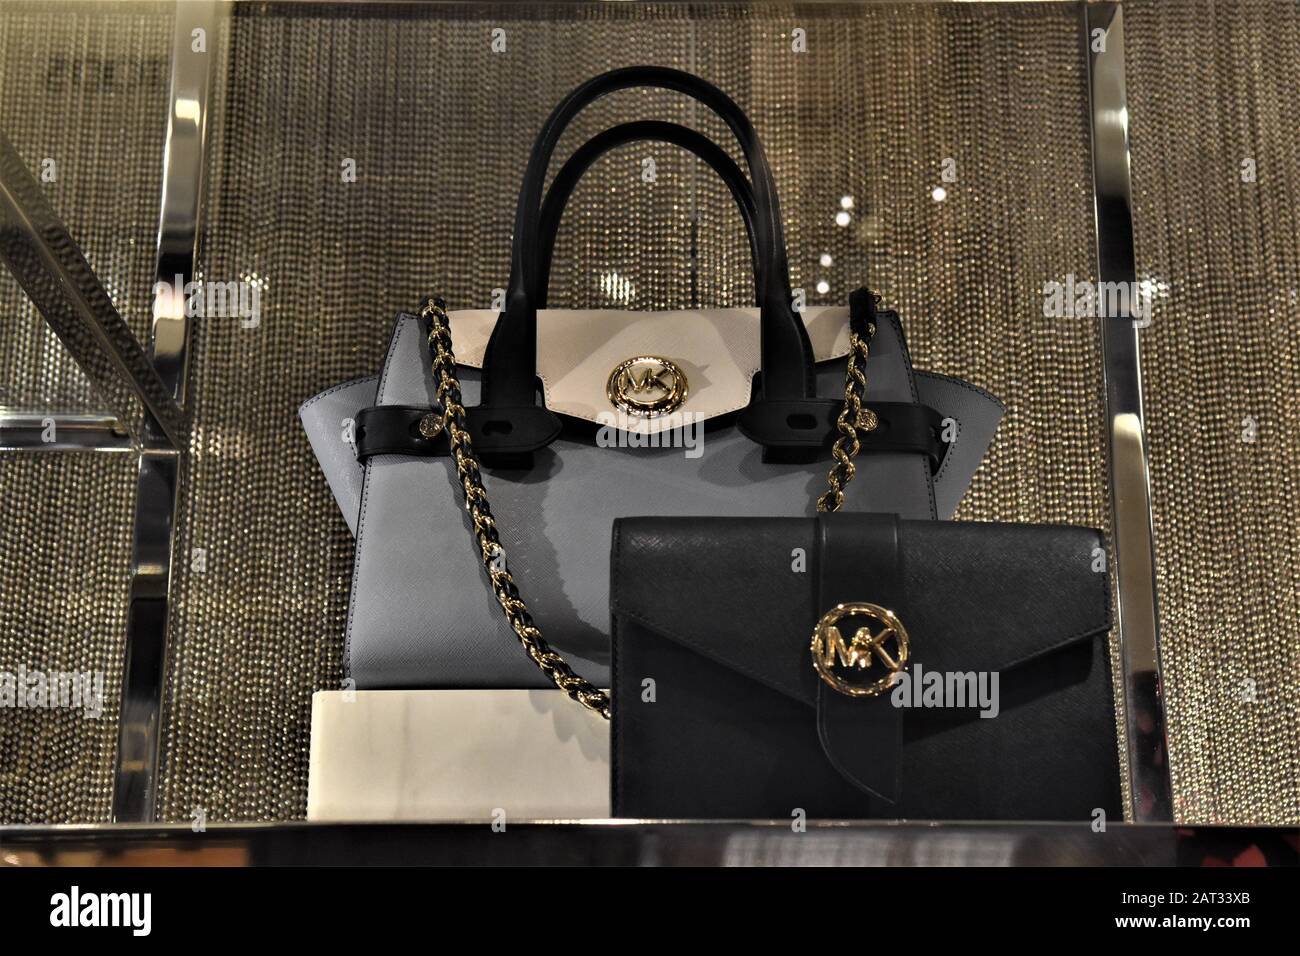 BAGS ON DISPLAY AT MICHAEL KORS BOUTIQUE IN CONDOTTI STREET,THE CENTER ...